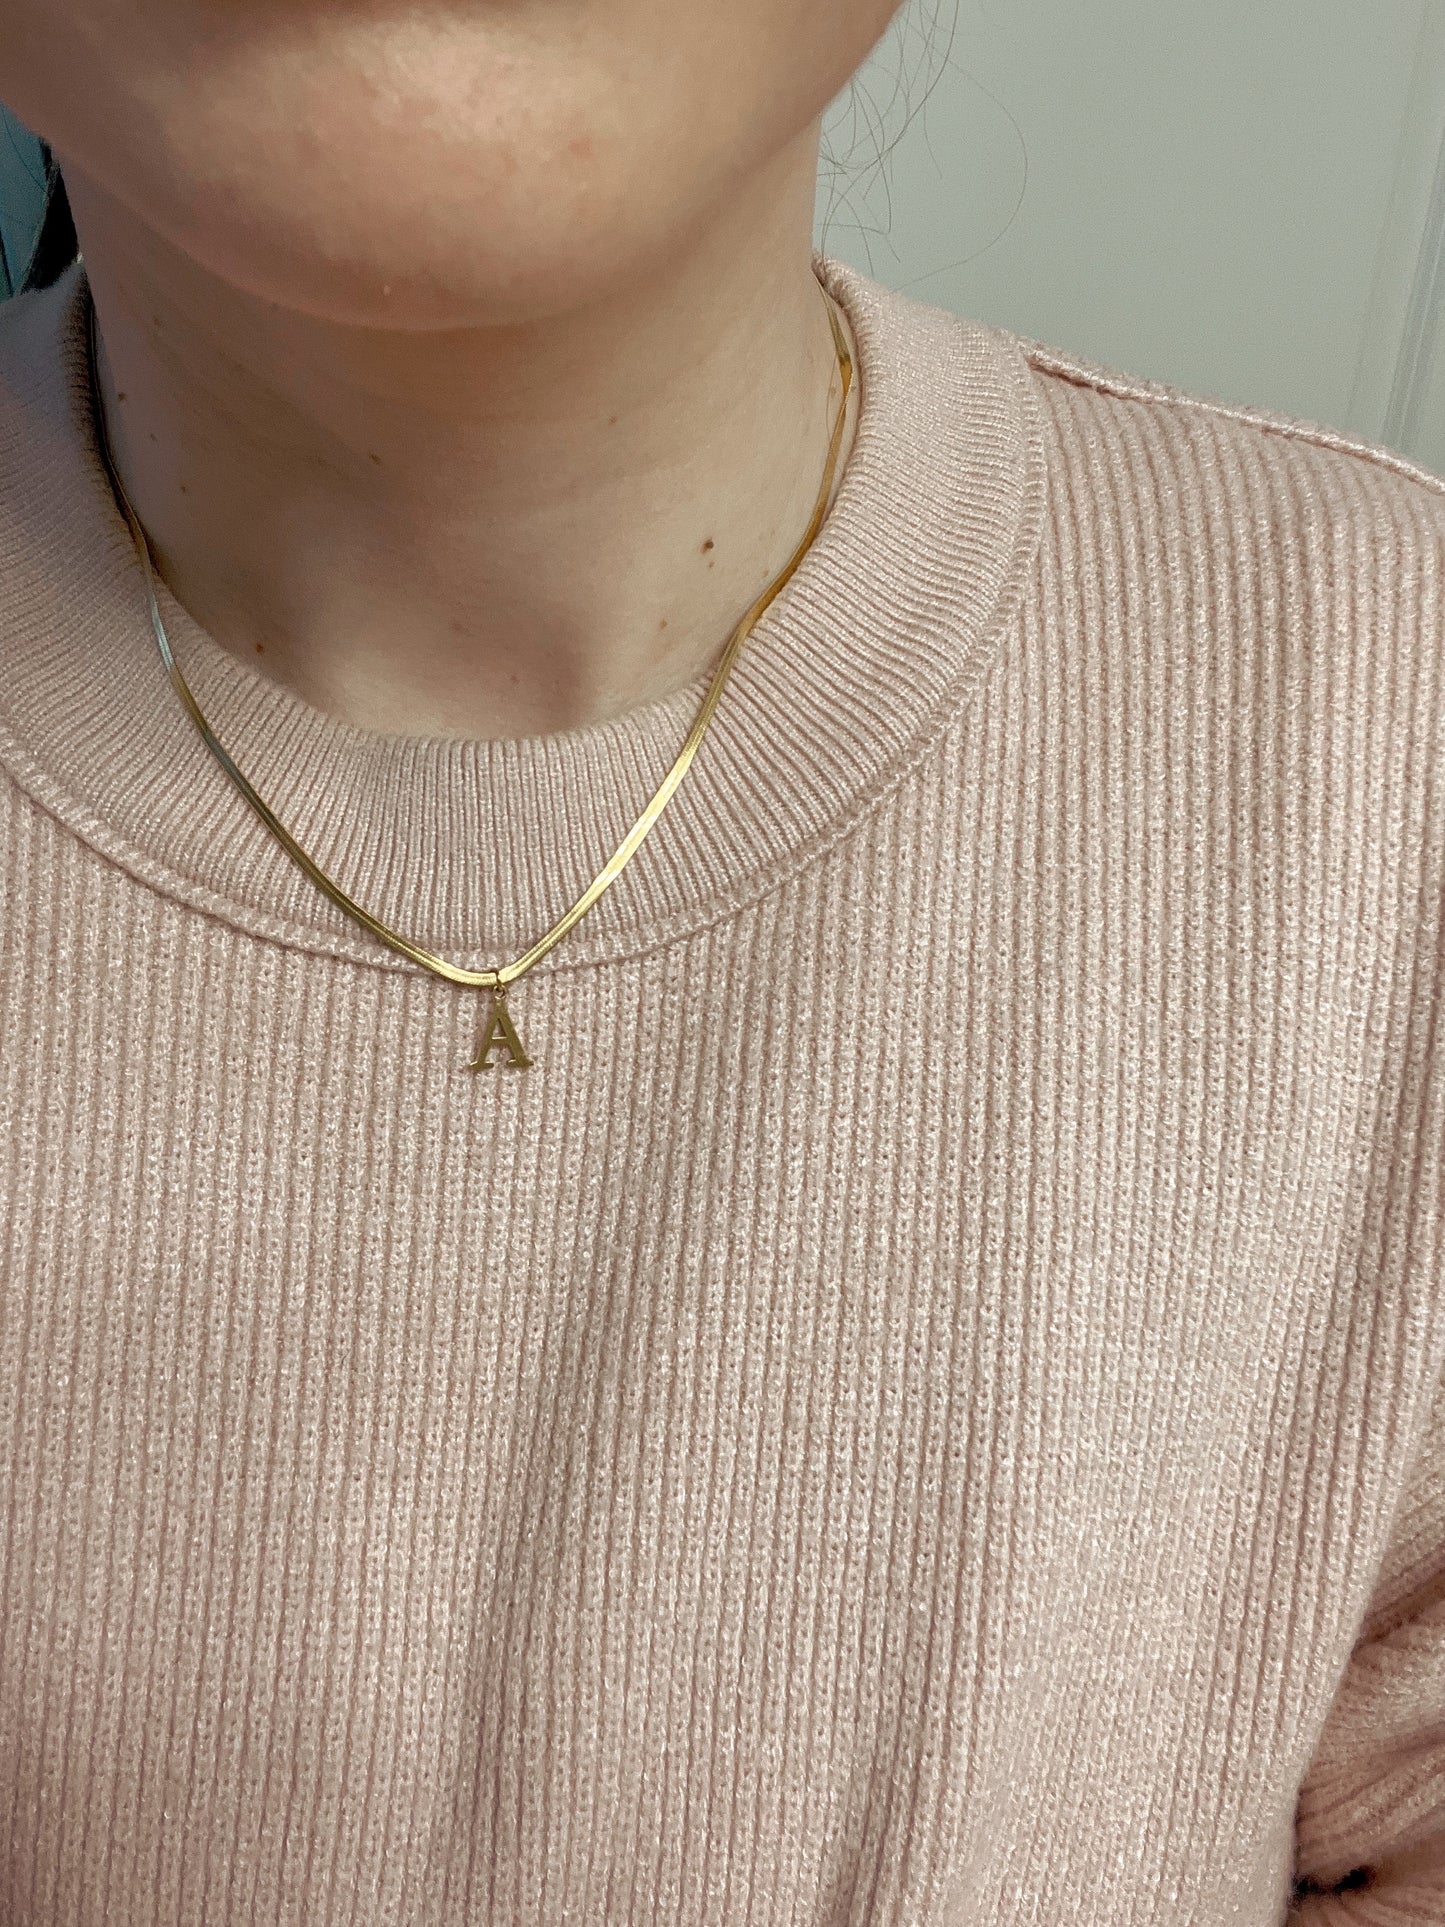 Snake chain initial necklace